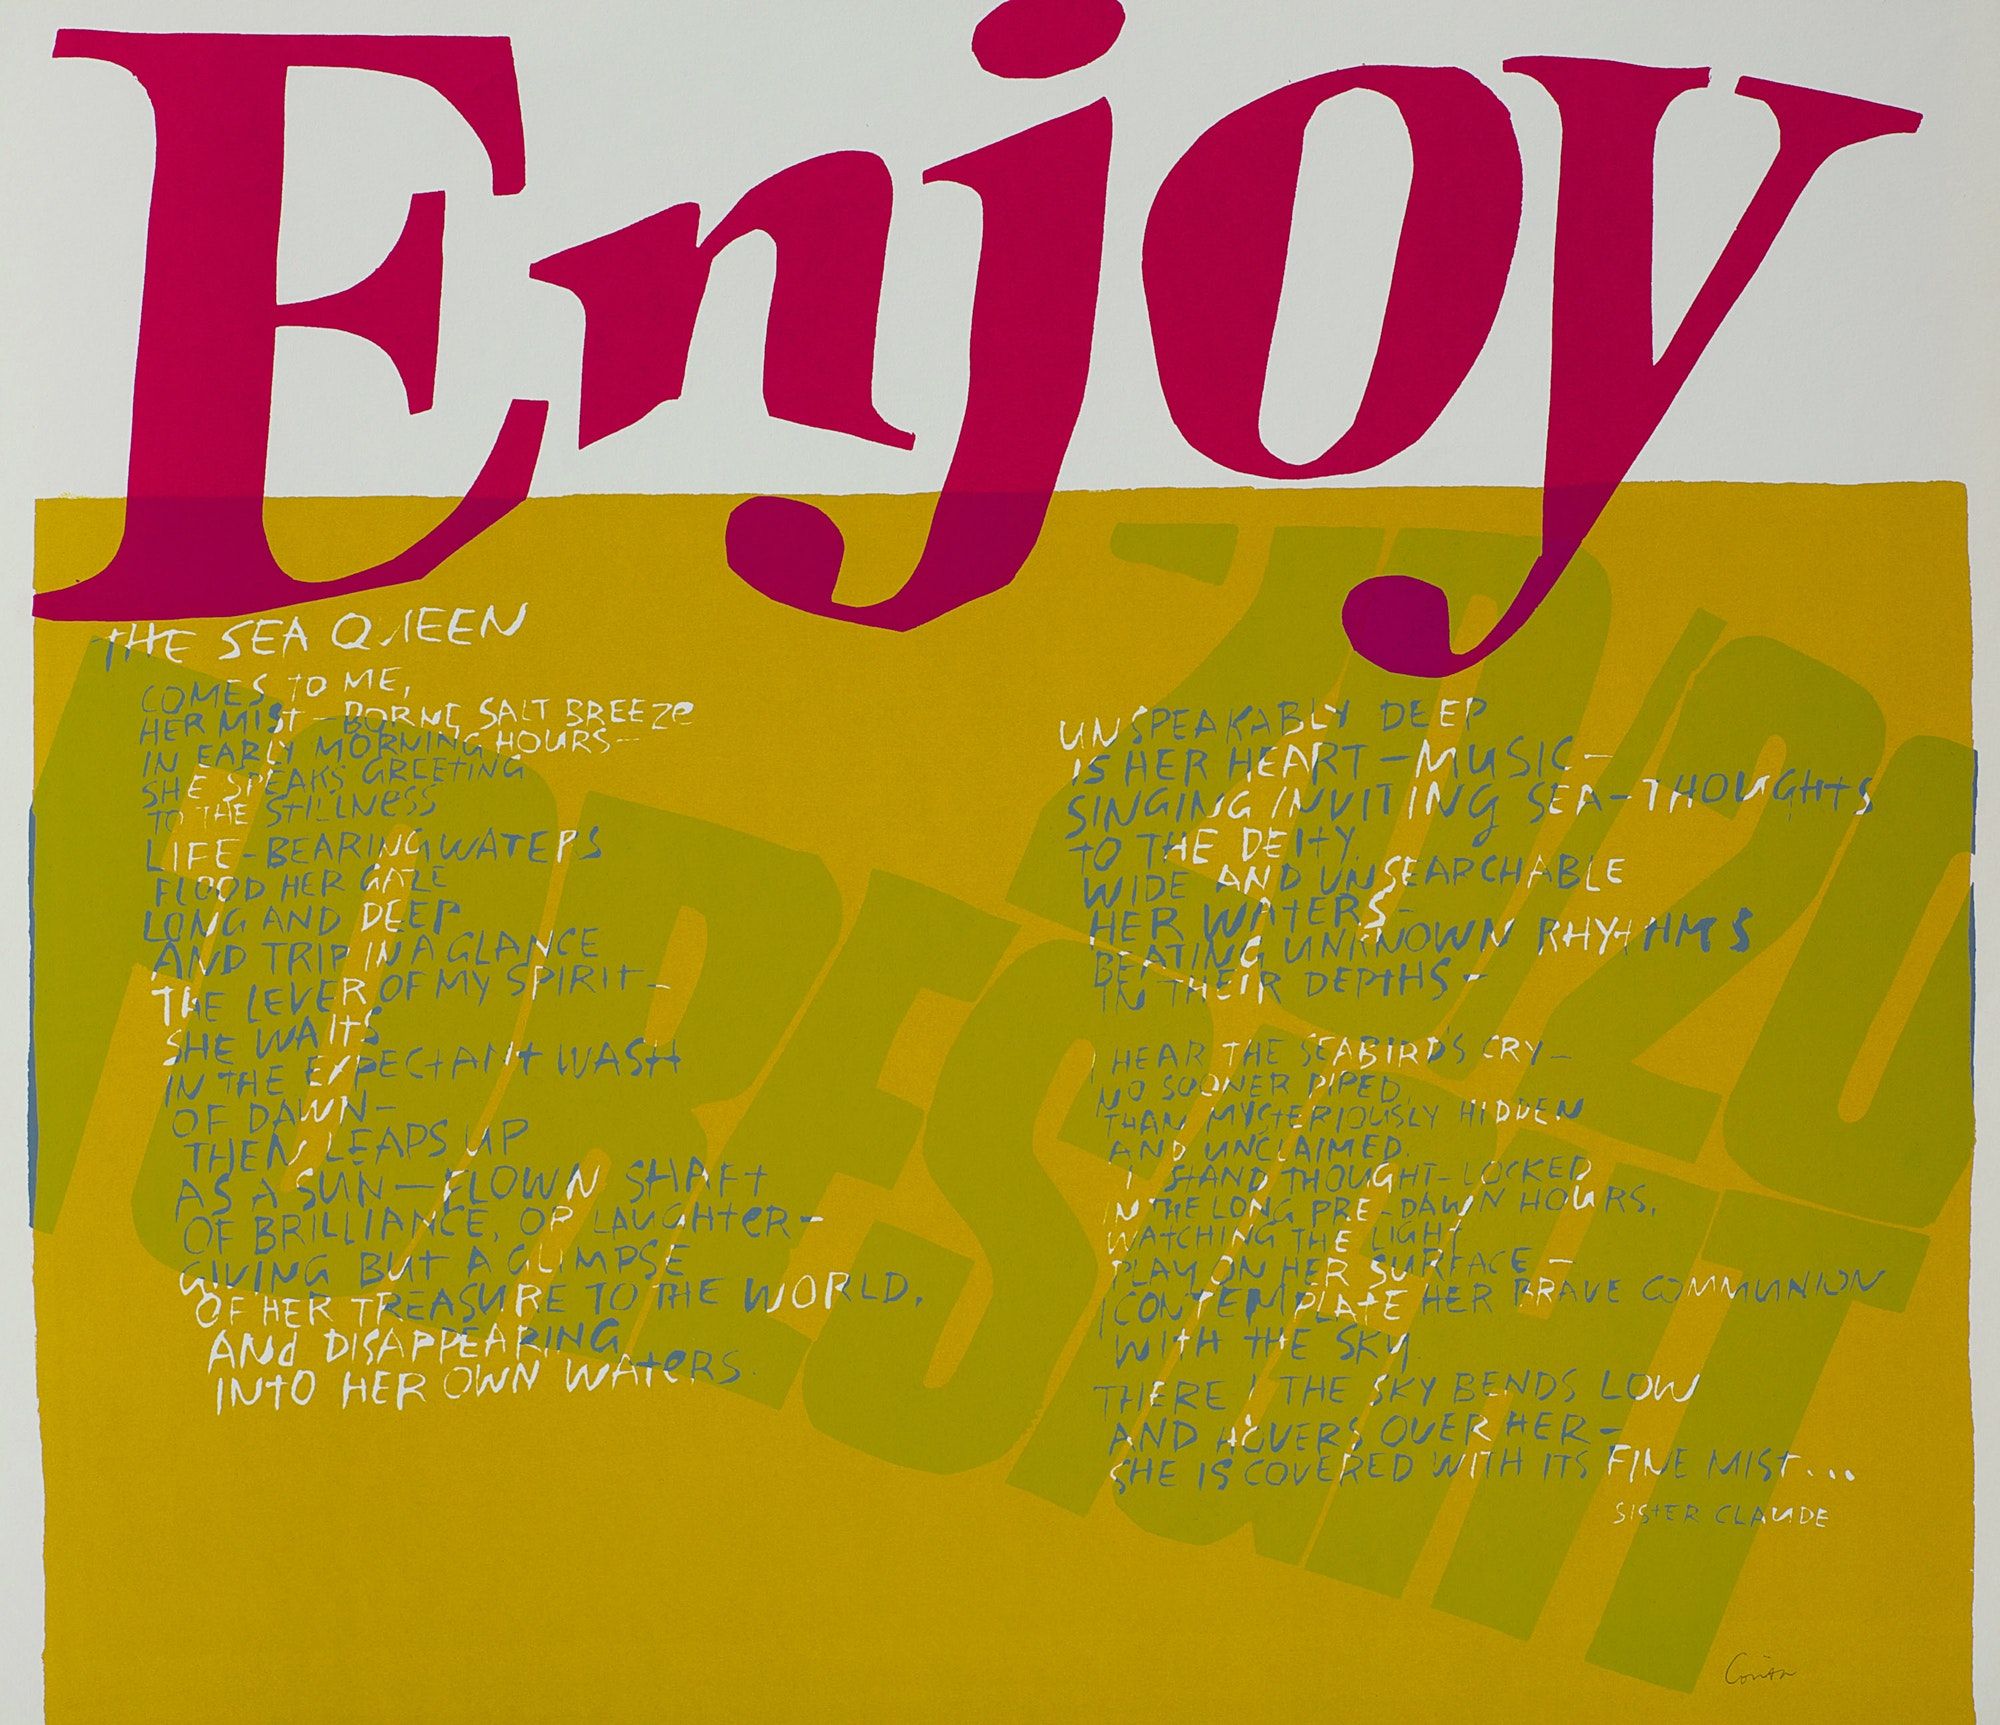 A print in cherry red and chartreuse with large text reading 'Enjoy' and a poem called The Sea Queen in small scratchy text